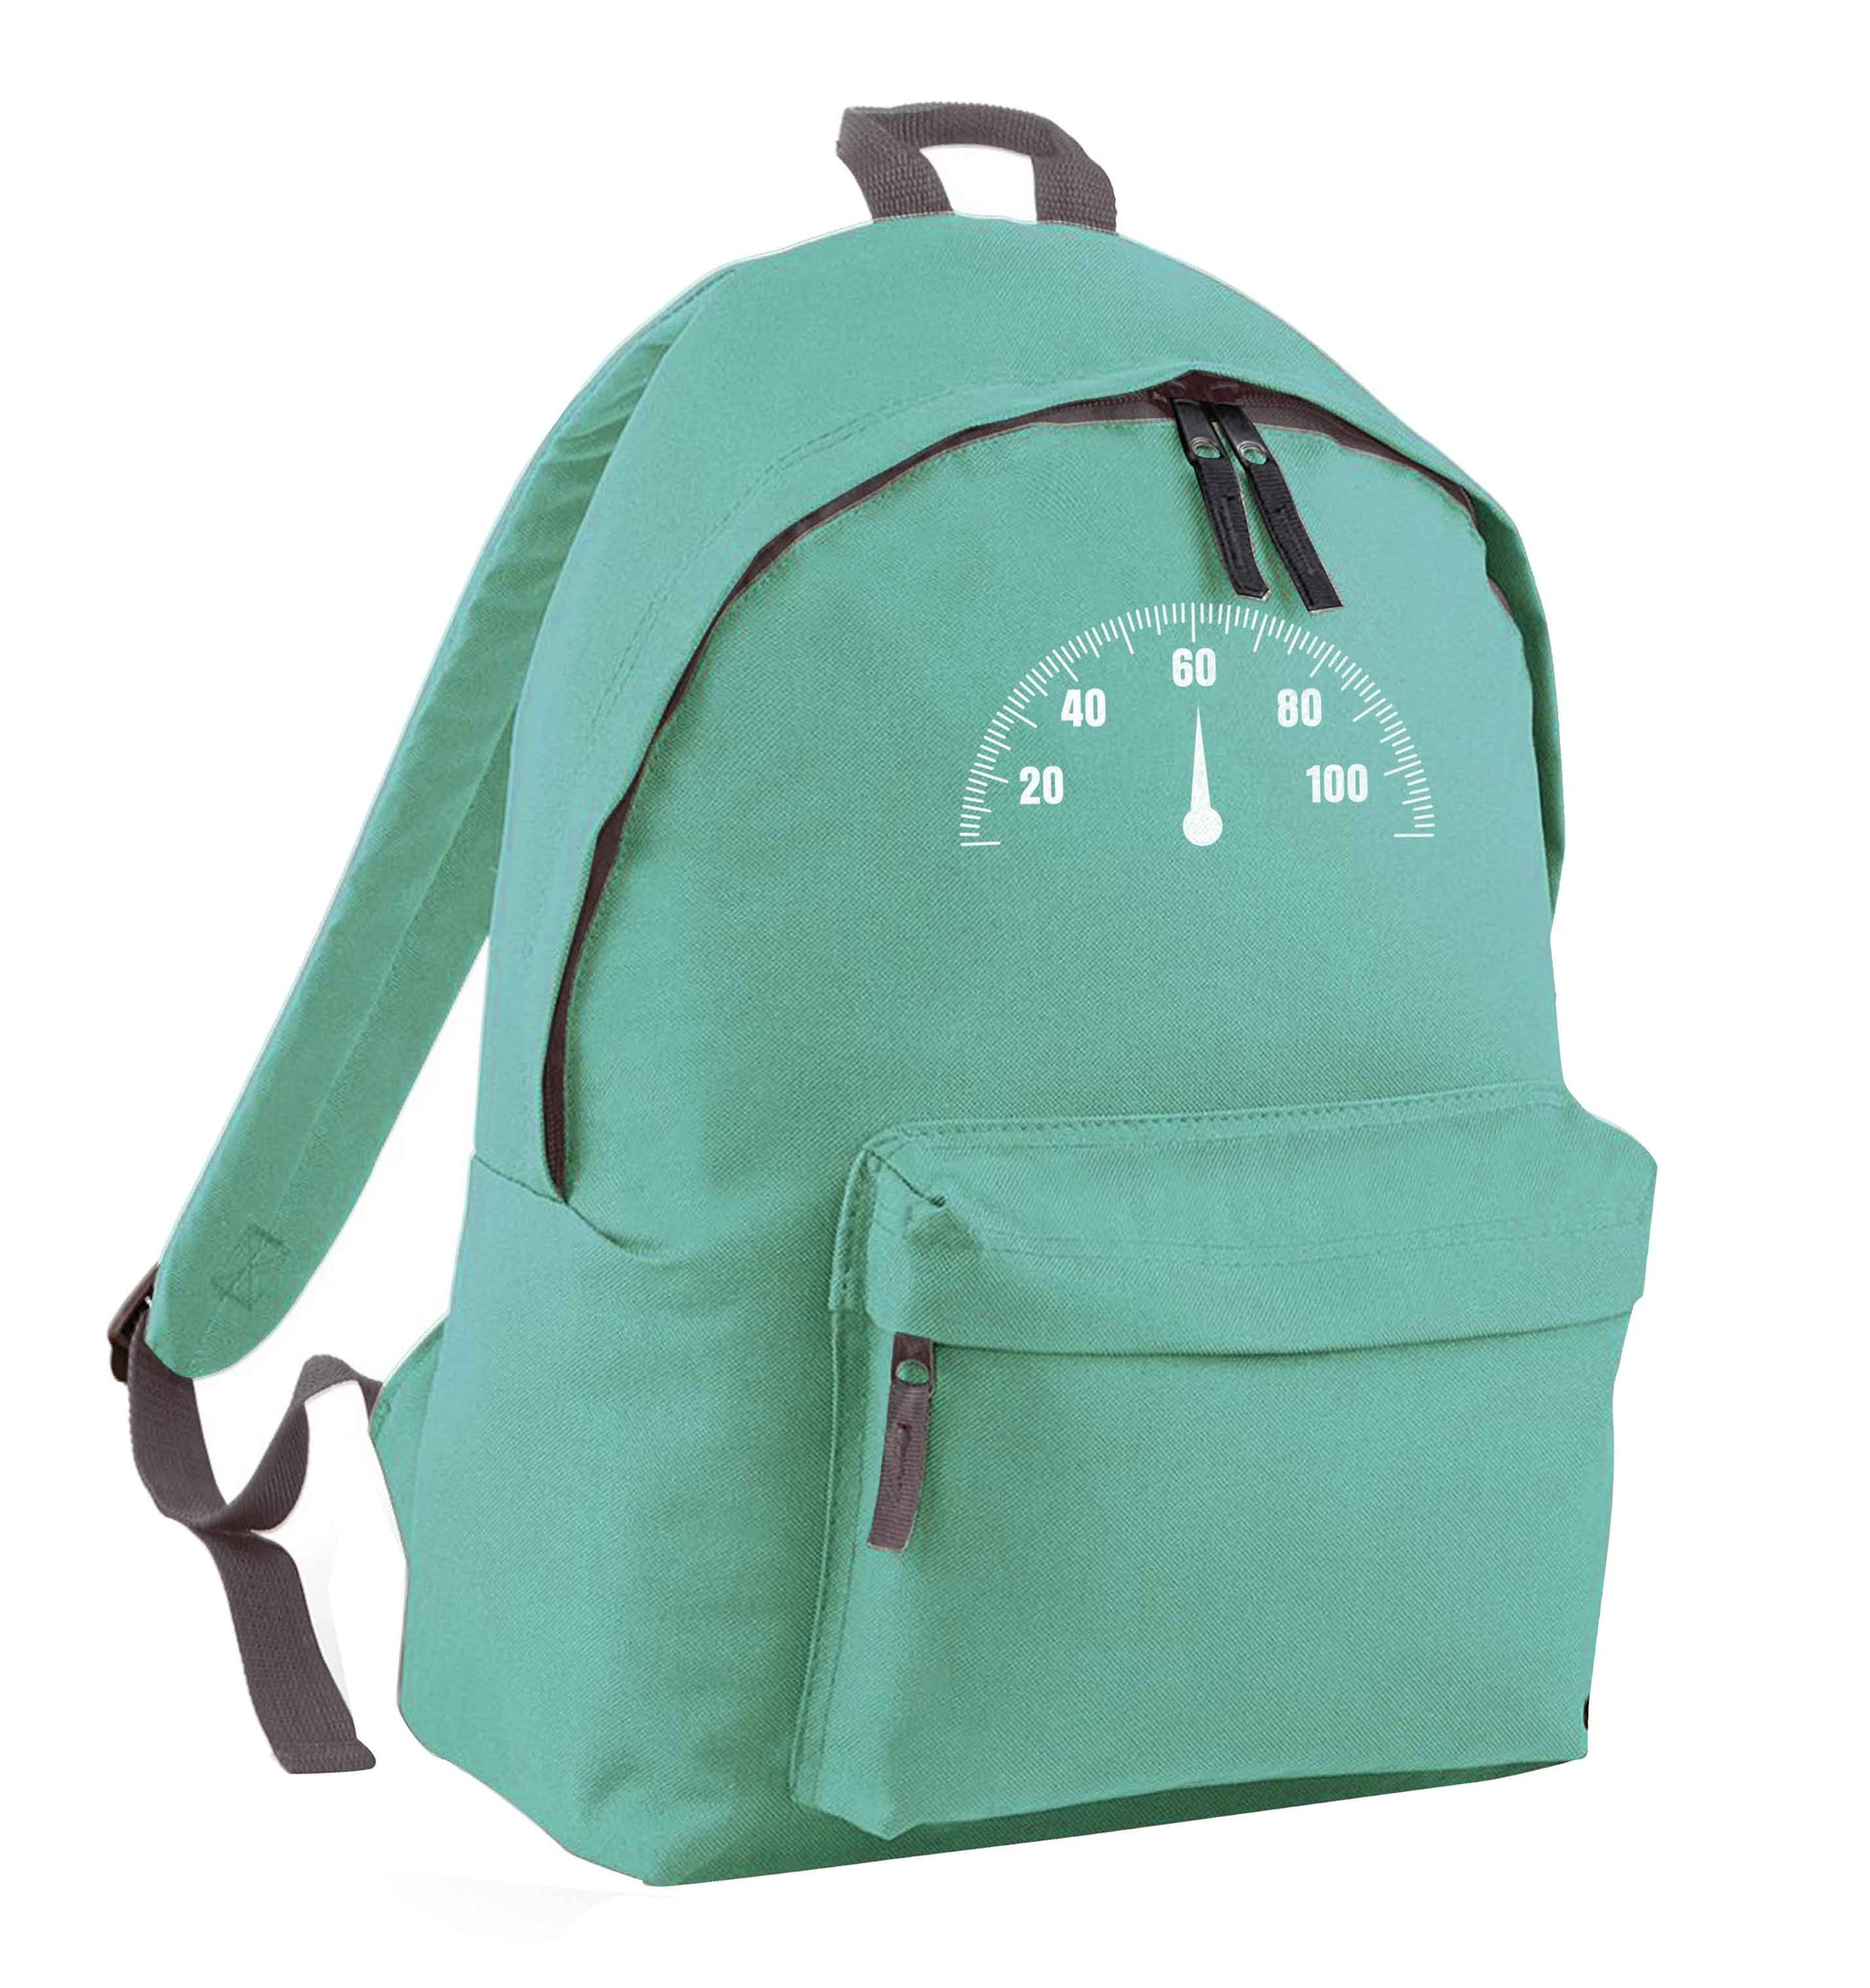 Speed dial 60 mint adults backpack